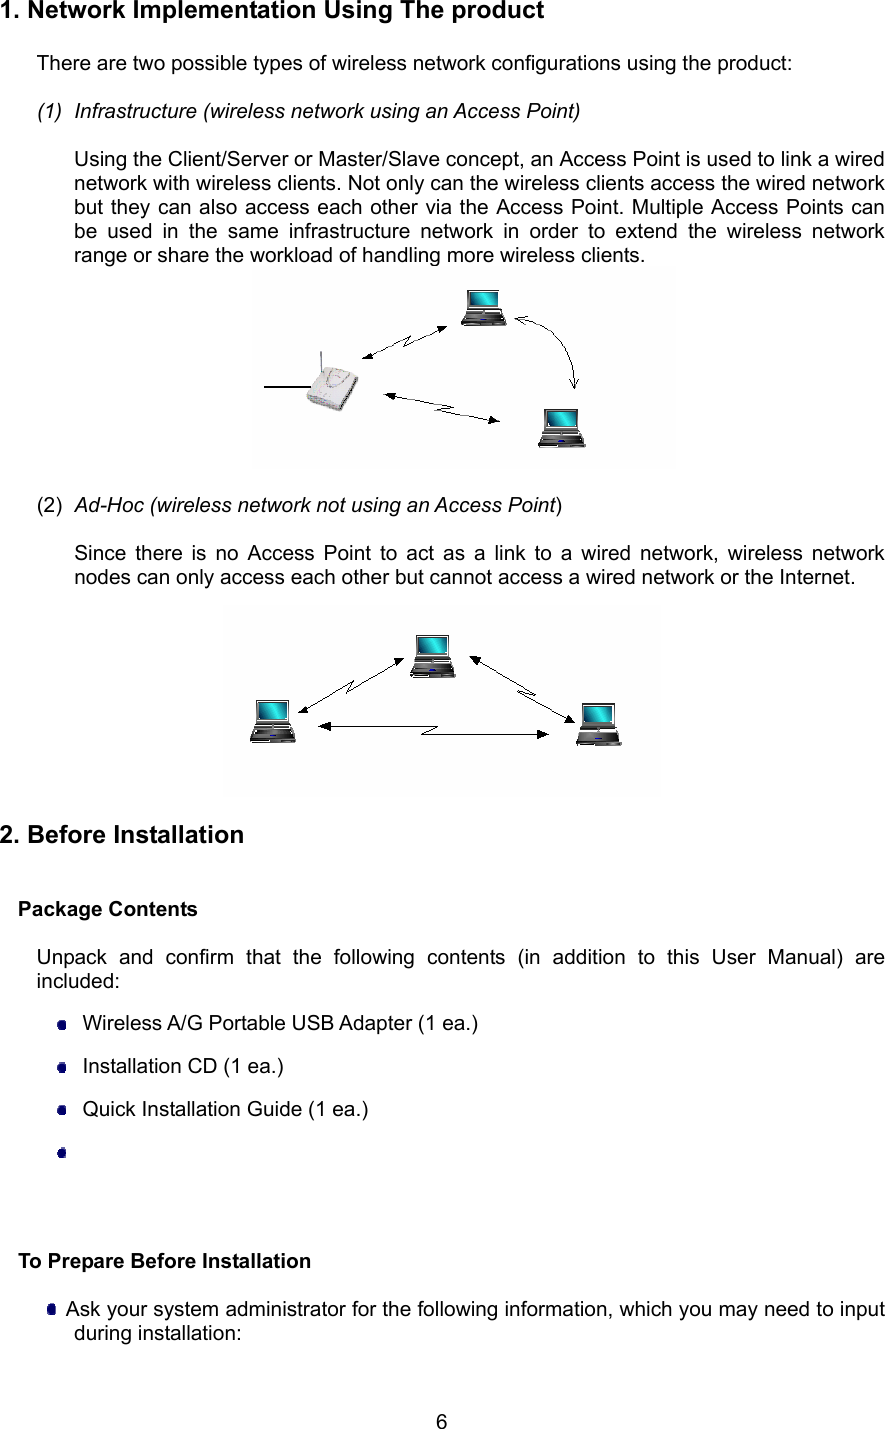  6 1. Network Implementation Using The product  There are two possible types of wireless network configurations using the product:  (1)  Infrastructure (wireless network using an Access Point)  Using the Client/Server or Master/Slave concept, an Access Point is used to link a wired network with wireless clients. Not only can the wireless clients access the wired network but they can also access each other via the Access Point. Multiple Access Points can be used in the same infrastructure network in order to extend the wireless network range or share the workload of handling more wireless clients.   (2)  Ad-Hoc (wireless network not using an Access Point)  Since there is no Access Point to act as a link to a wired network, wireless network nodes can only access each other but cannot access a wired network or the Internet.    2. Before Installation   Package Contents  Unpack and confirm that the following contents (in addition to this User Manual) are included:   Wireless A/G Portable USB Adapter (1 ea.)   Installation CD (1 ea.)   Quick Installation Guide (1 ea.)                            To Prepare Before Installation    Ask your system administrator for the following information, which you may need to input during installation: 